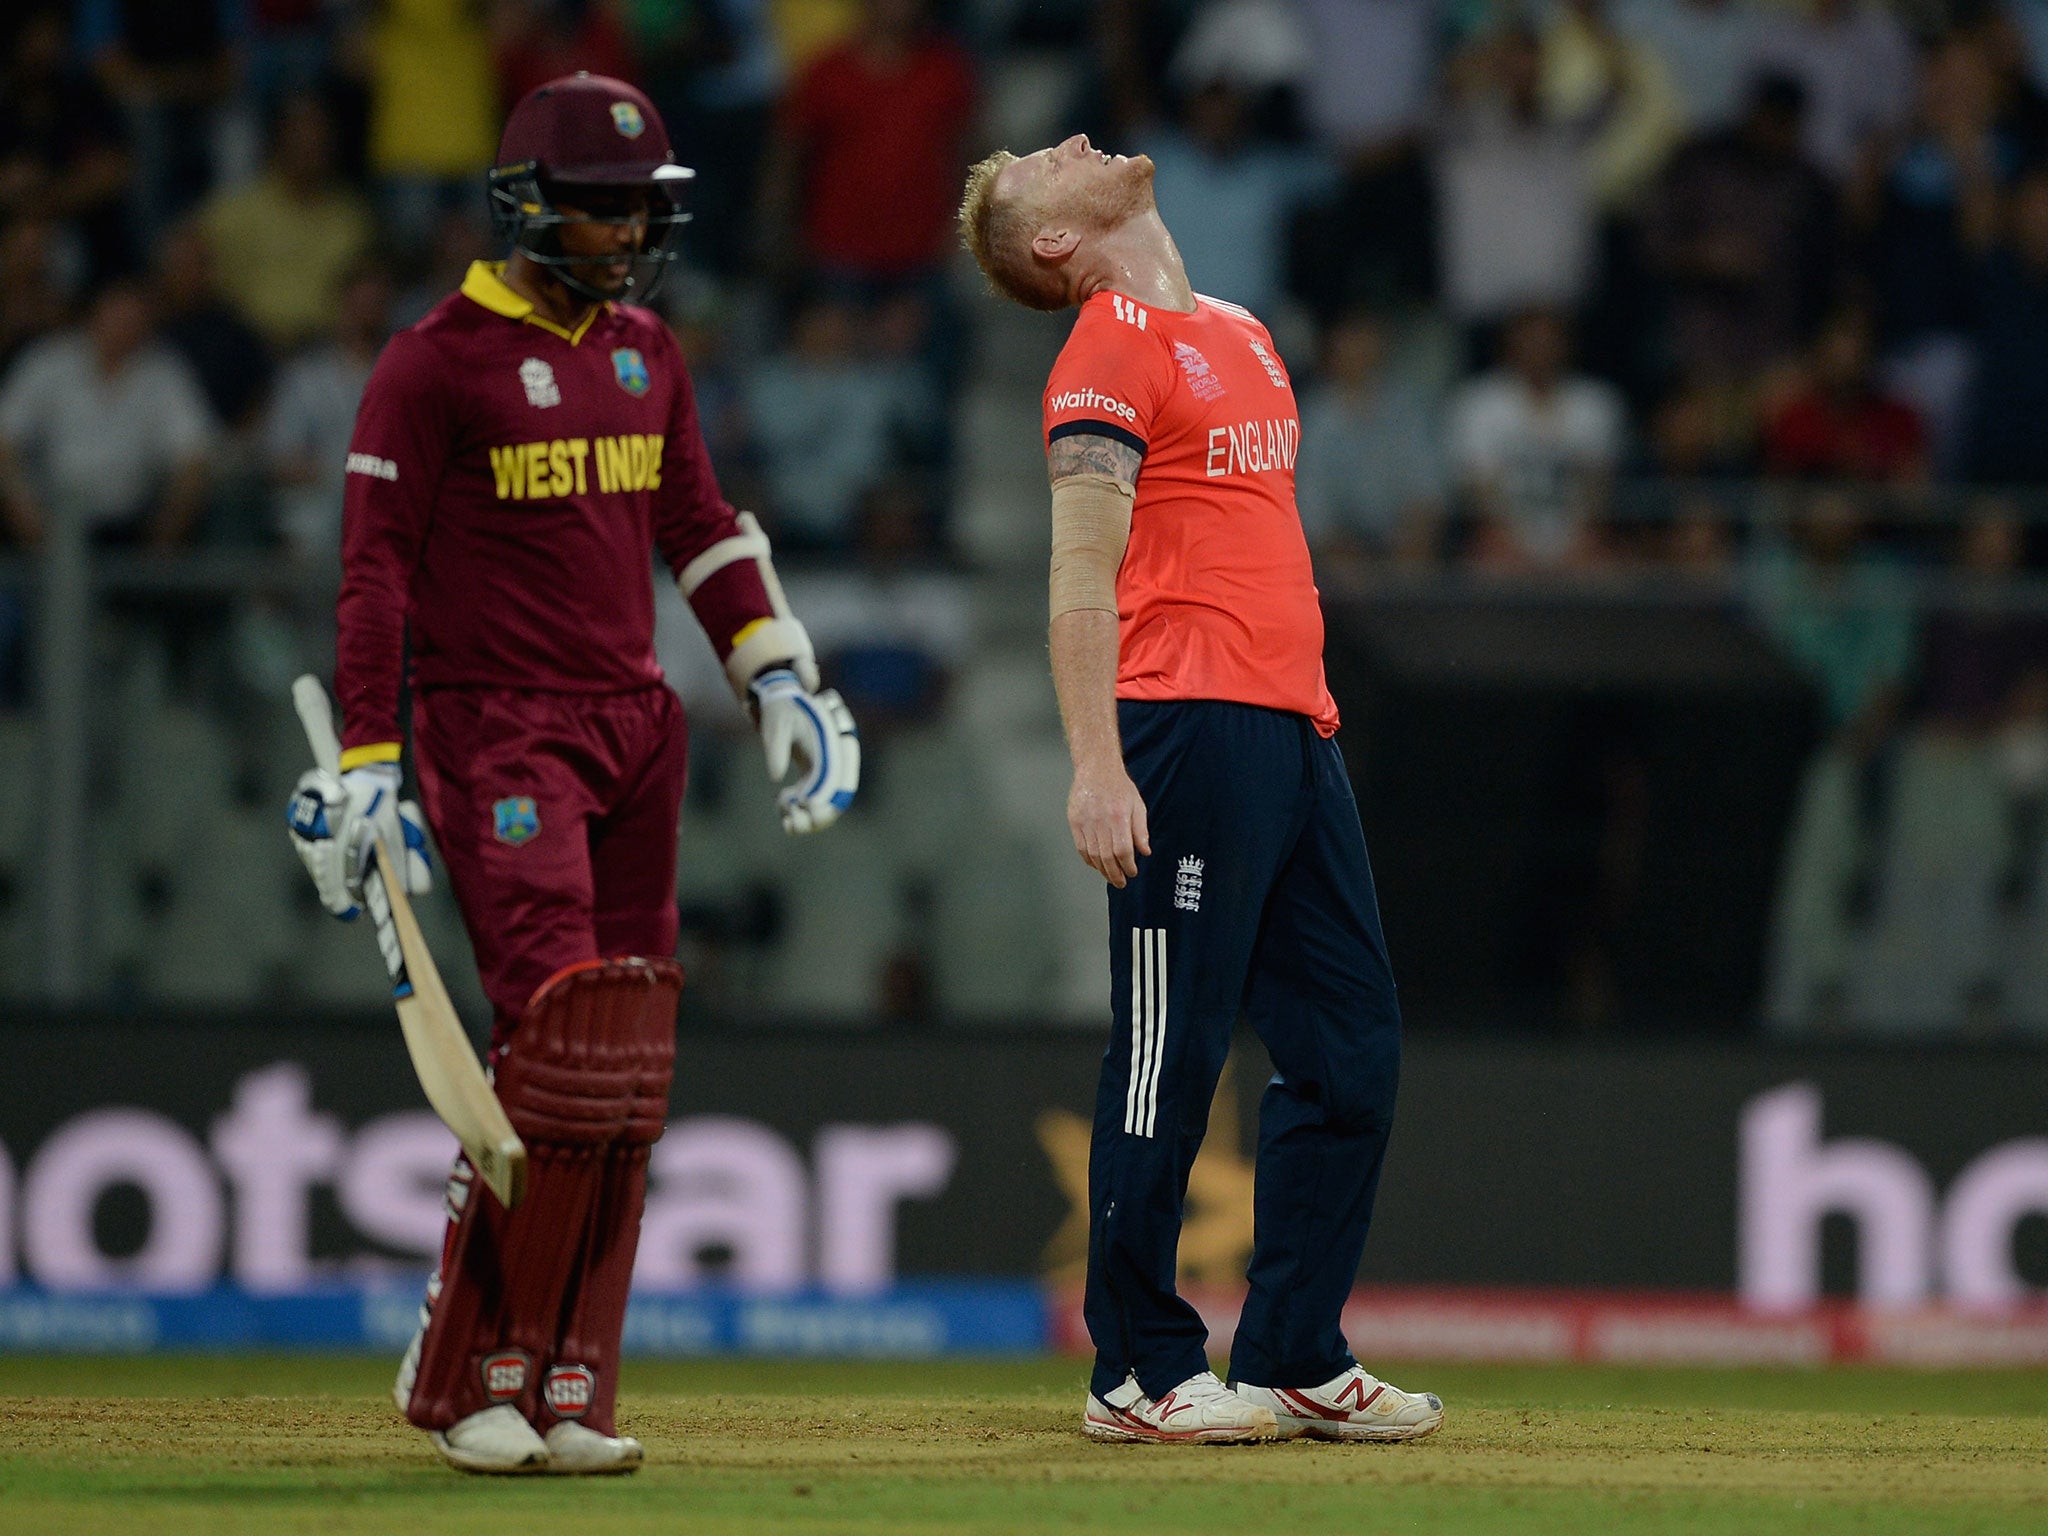 Ben Stokes and Chris Gayle during the ICC World Twenty20 India in 2016